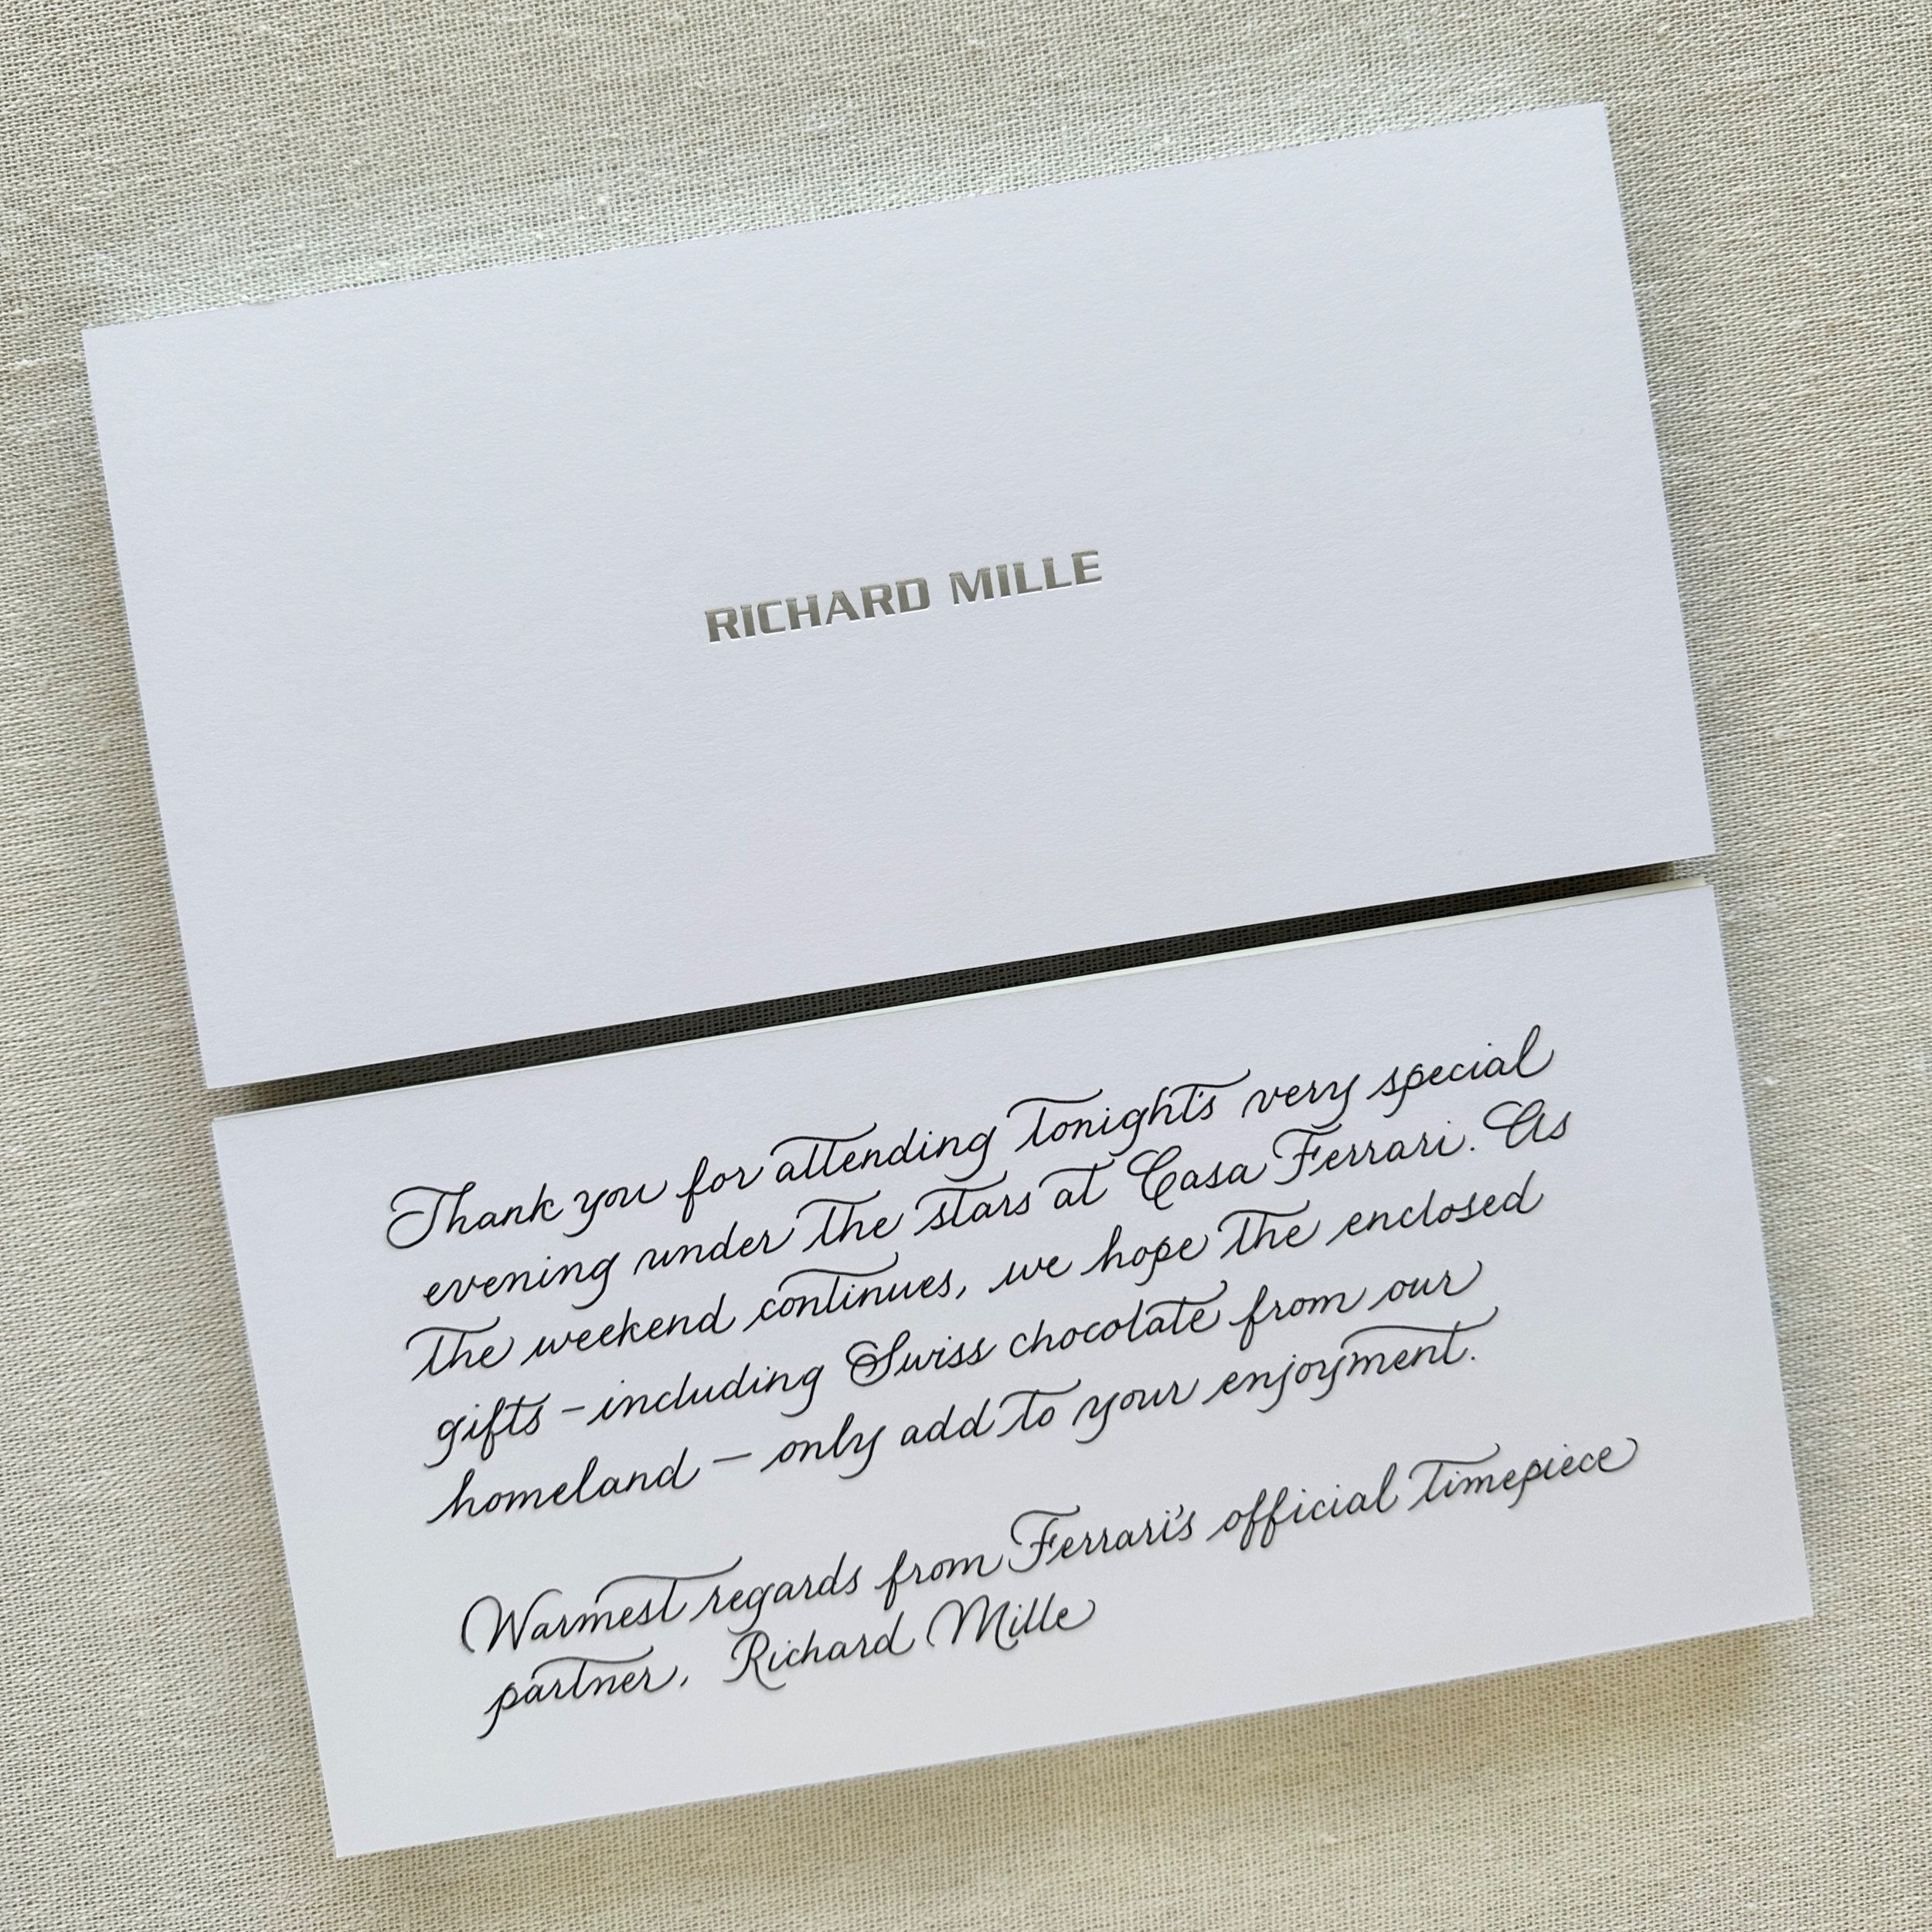 Richard Mille - personalized note cards